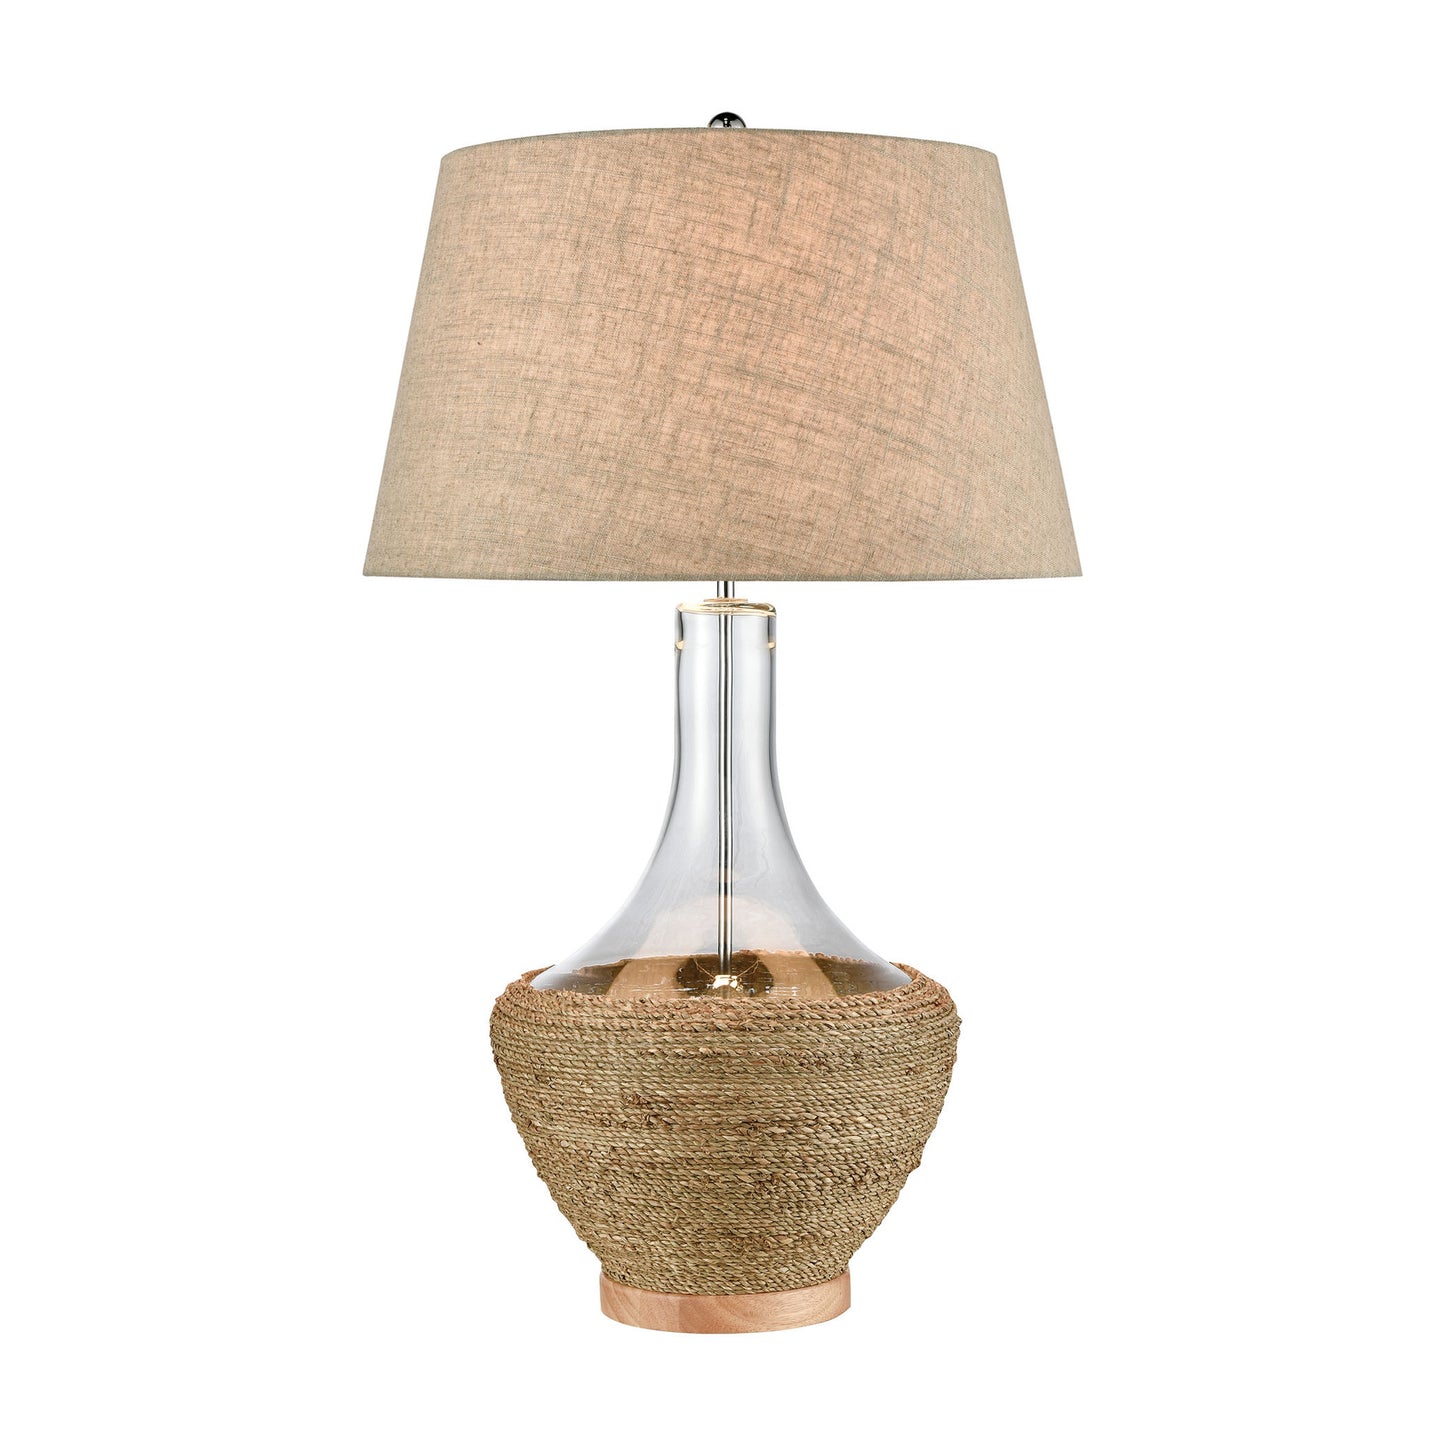 D-D4561 - Cord Table Lamp